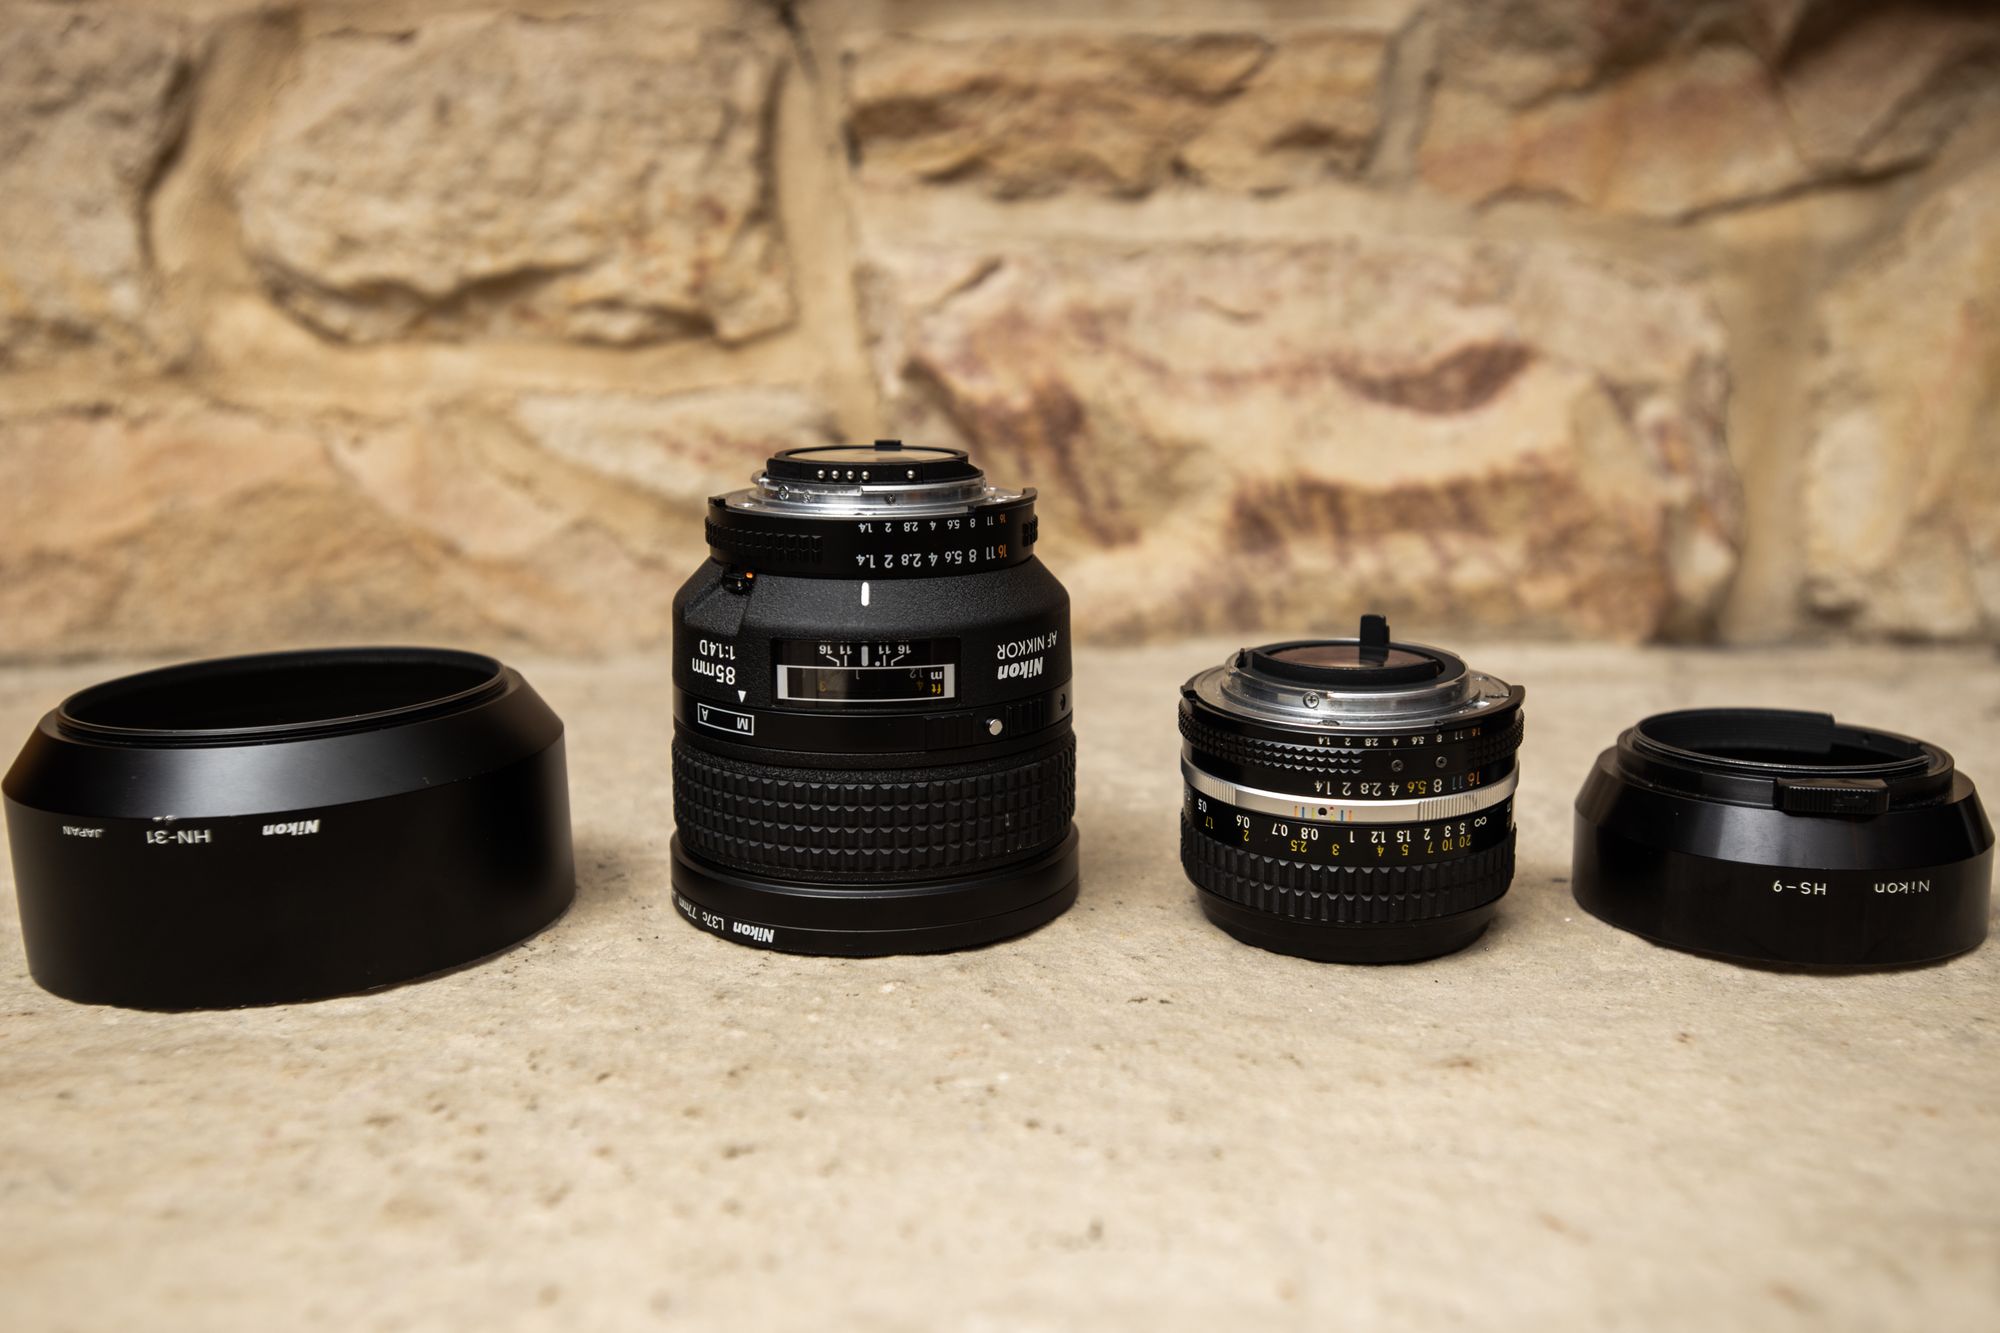 Back to the Basics: My Experiences With the Nikkor 50mm F/1.4 AI-s 